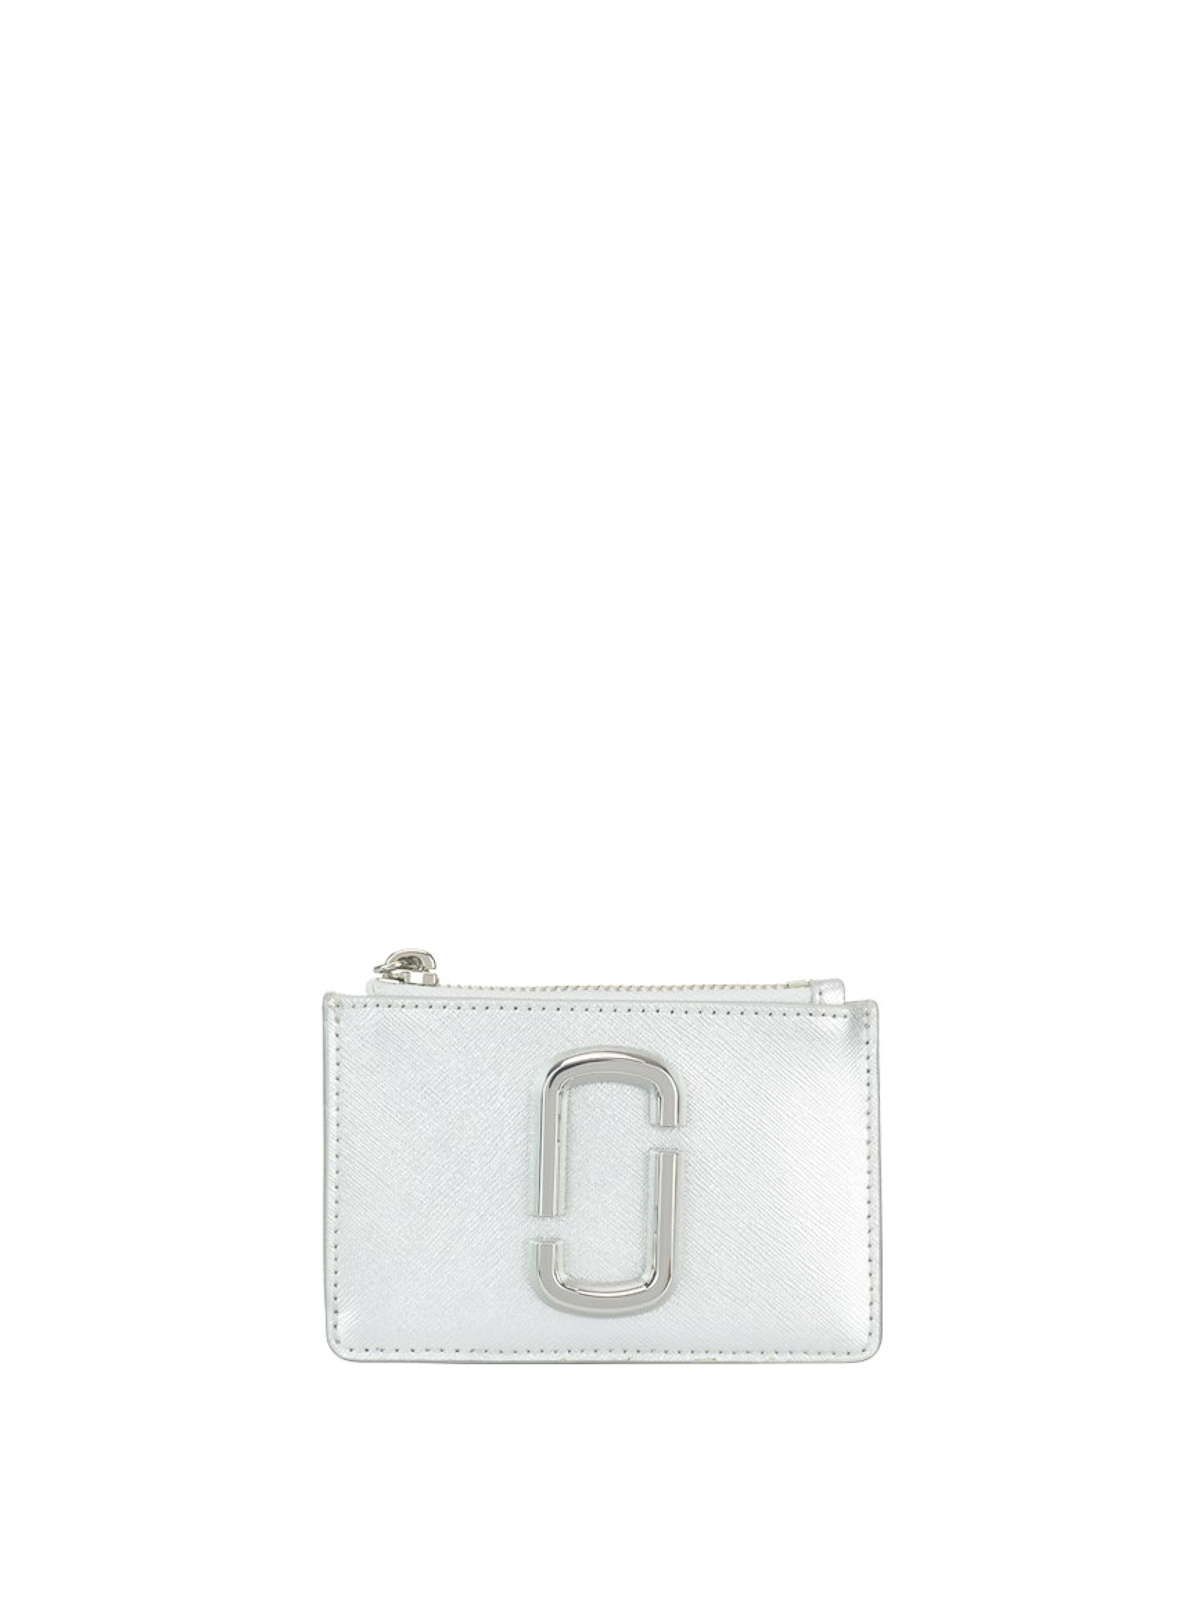 The Marc Jacobs The Snapshot DTM Metallic Silver in Saffiano